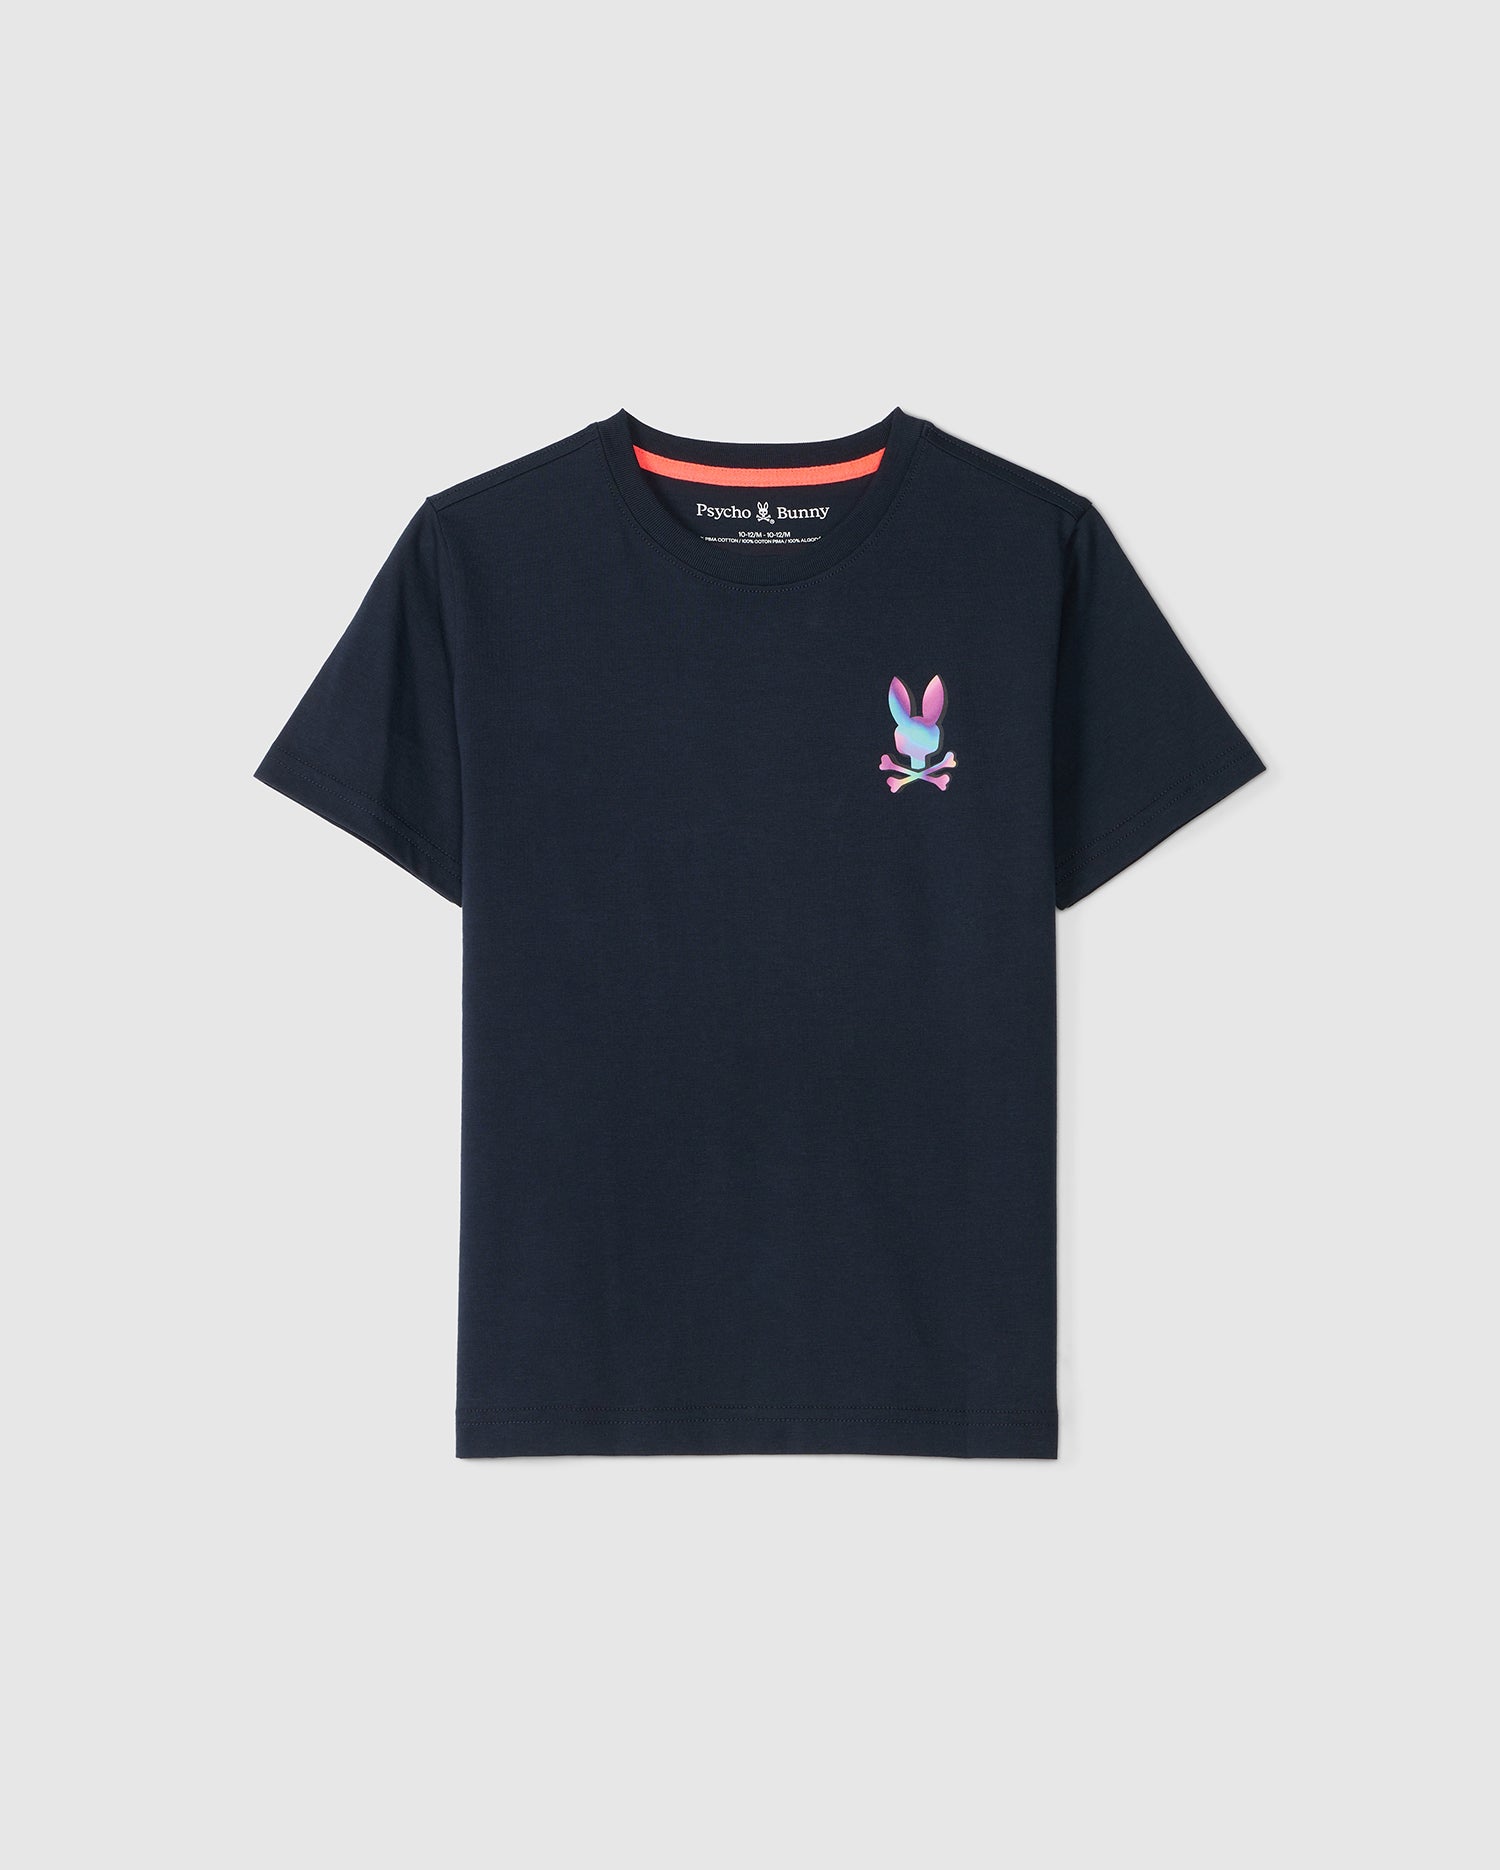 A navy blue Kids Tyler Back Graphic Tee with a small, multicolored bunny logo on the left chest area, featuring ribbed red trim at the collar by Psycho Bunny.